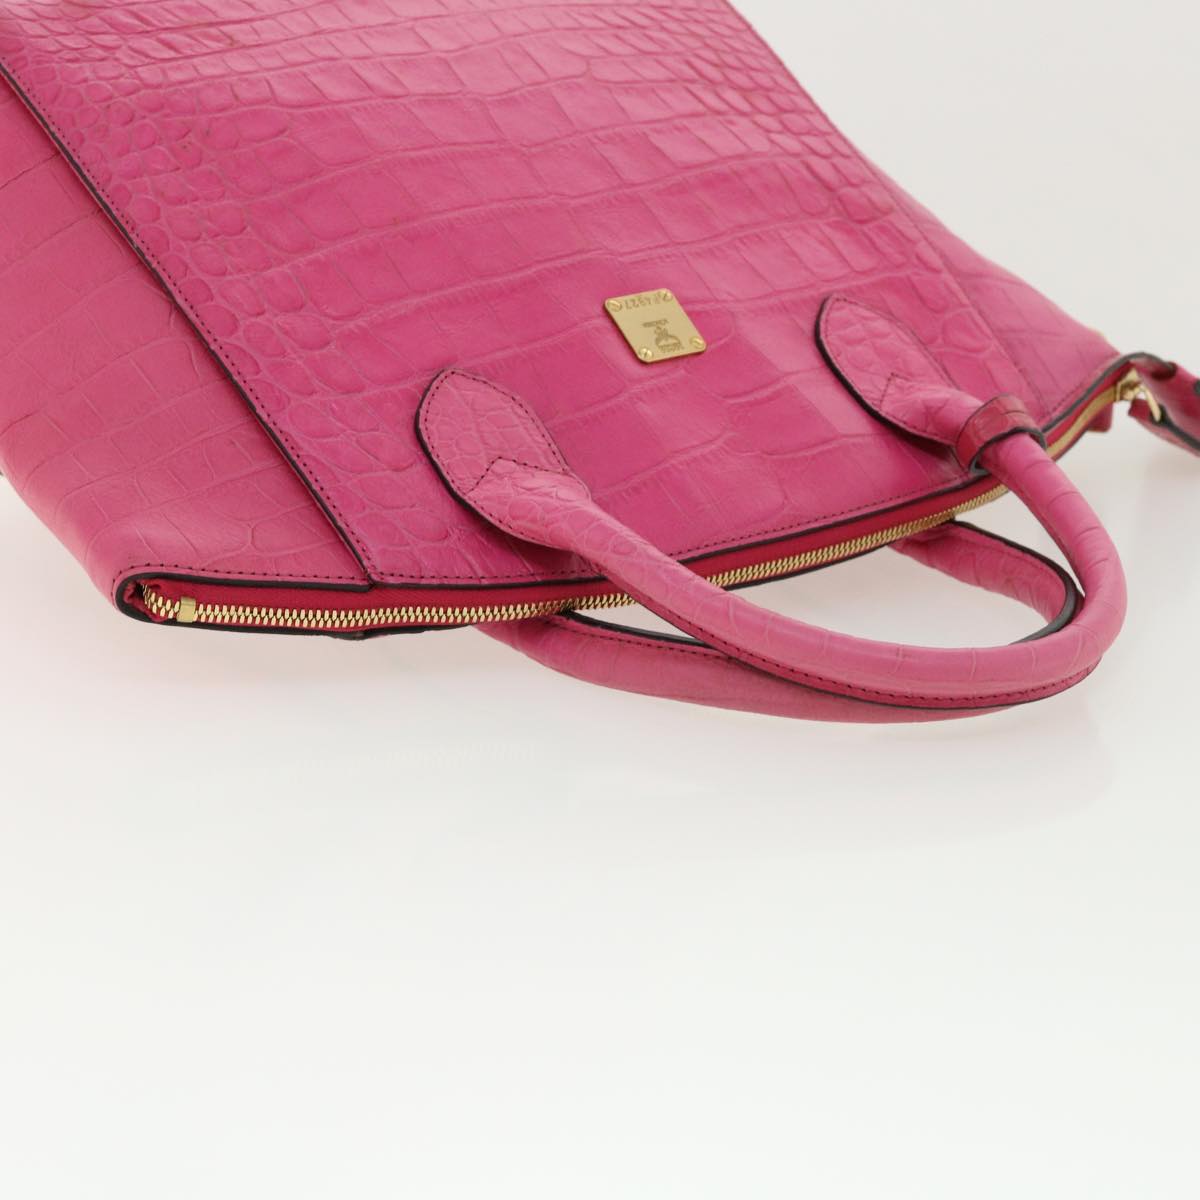 MCM Hand Bag Leather Pink Auth 34038